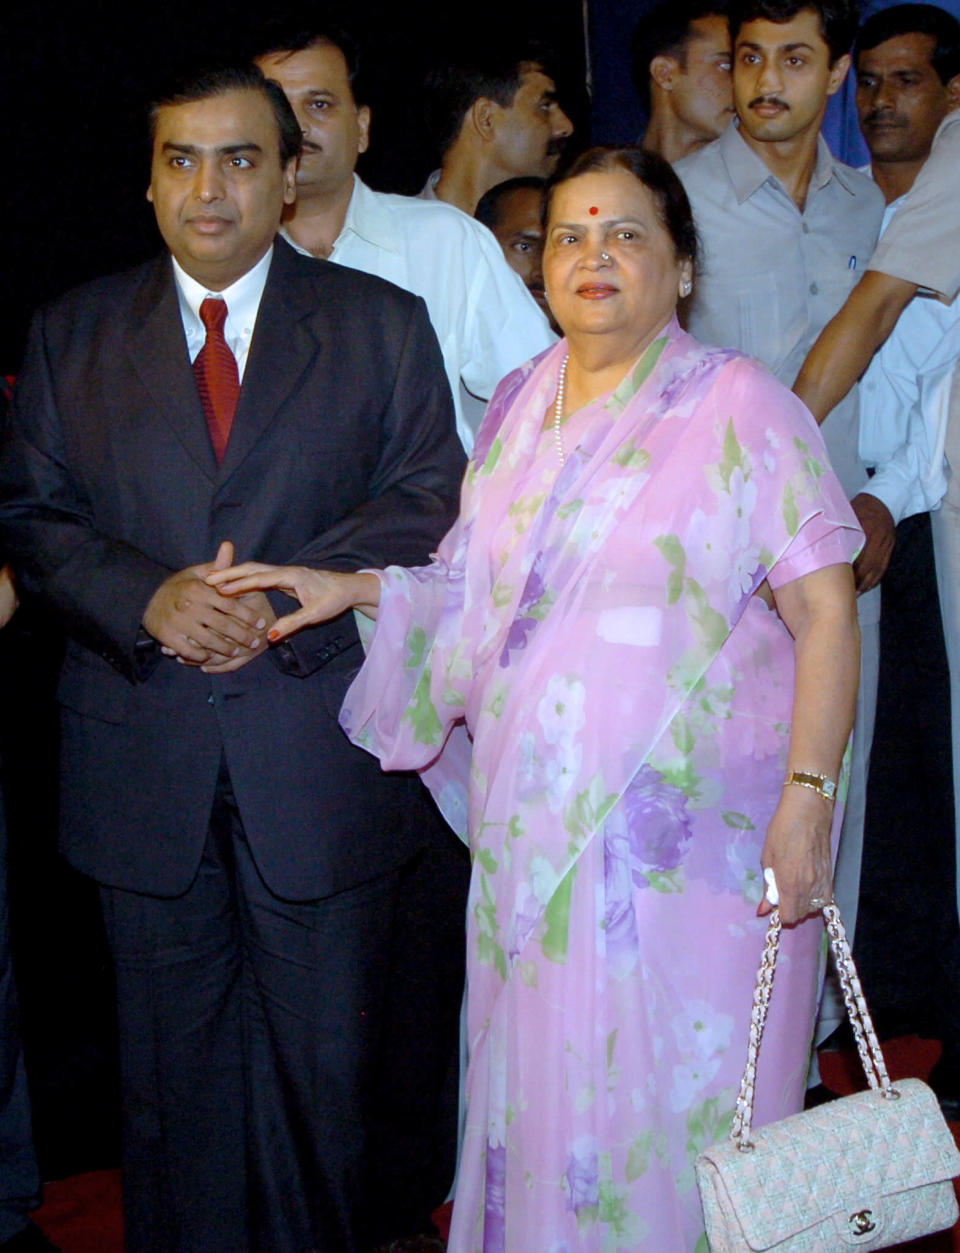 (FILES) In this picture taken August 3, 2005, Chairman of Reliance Industries Limited Mukesh Ambani (L) is accompanied by his mother Kokilaben as he arrives at the company's 31st Annual General Meeting in Mumbai. An Indian judge has told India's Ambani brothers to get their mother to settle their latest fight over natural gas supplies, telling them it is in the "national interest," a report said on August 22, 2008. The two brothers, listed by Forbes magazine as among the world's six richest men, have been at odds since 2005 over a supply agreement from the Krishna Godavari basin off India's east coast. AFP PHOTO/Indranil MUKHERJEE/FILES